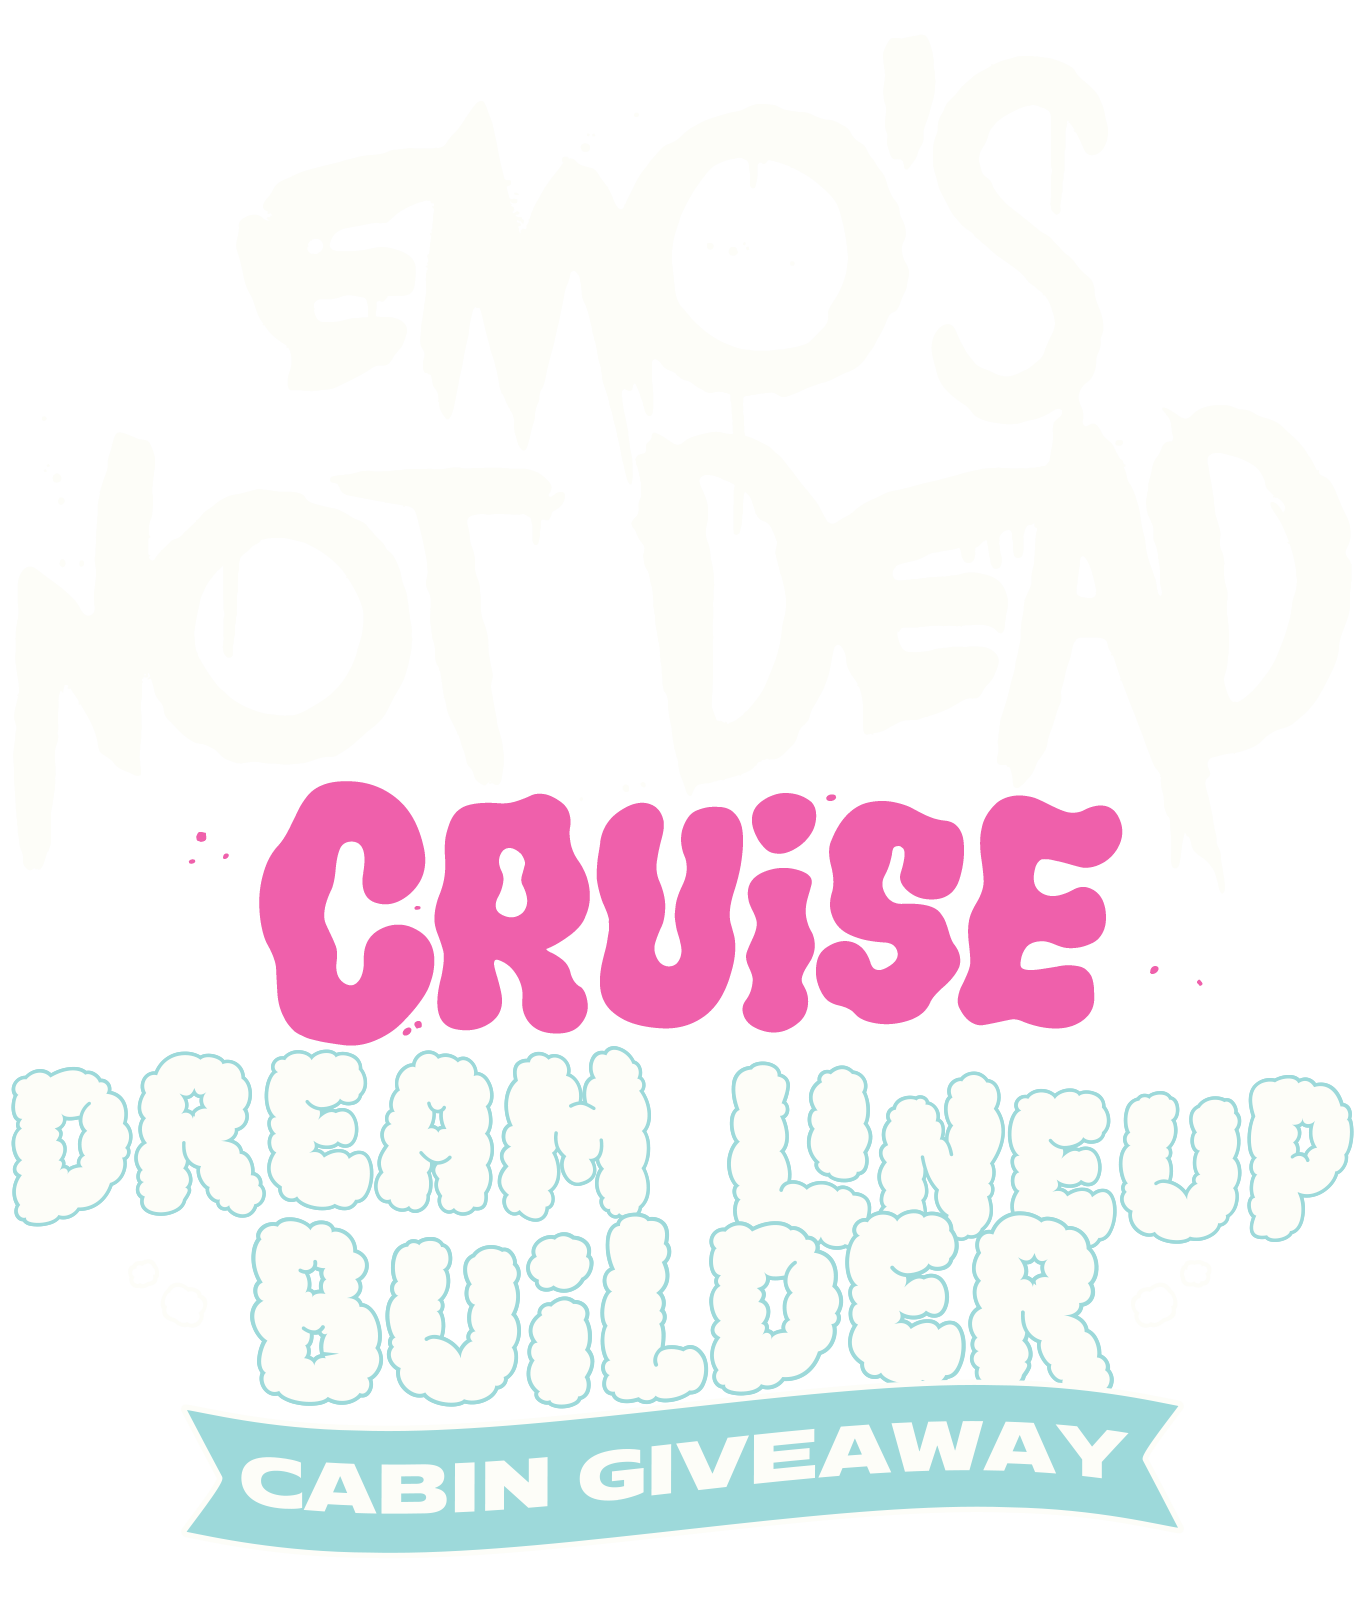 Emo's Not Dead Cruise - ends May 31